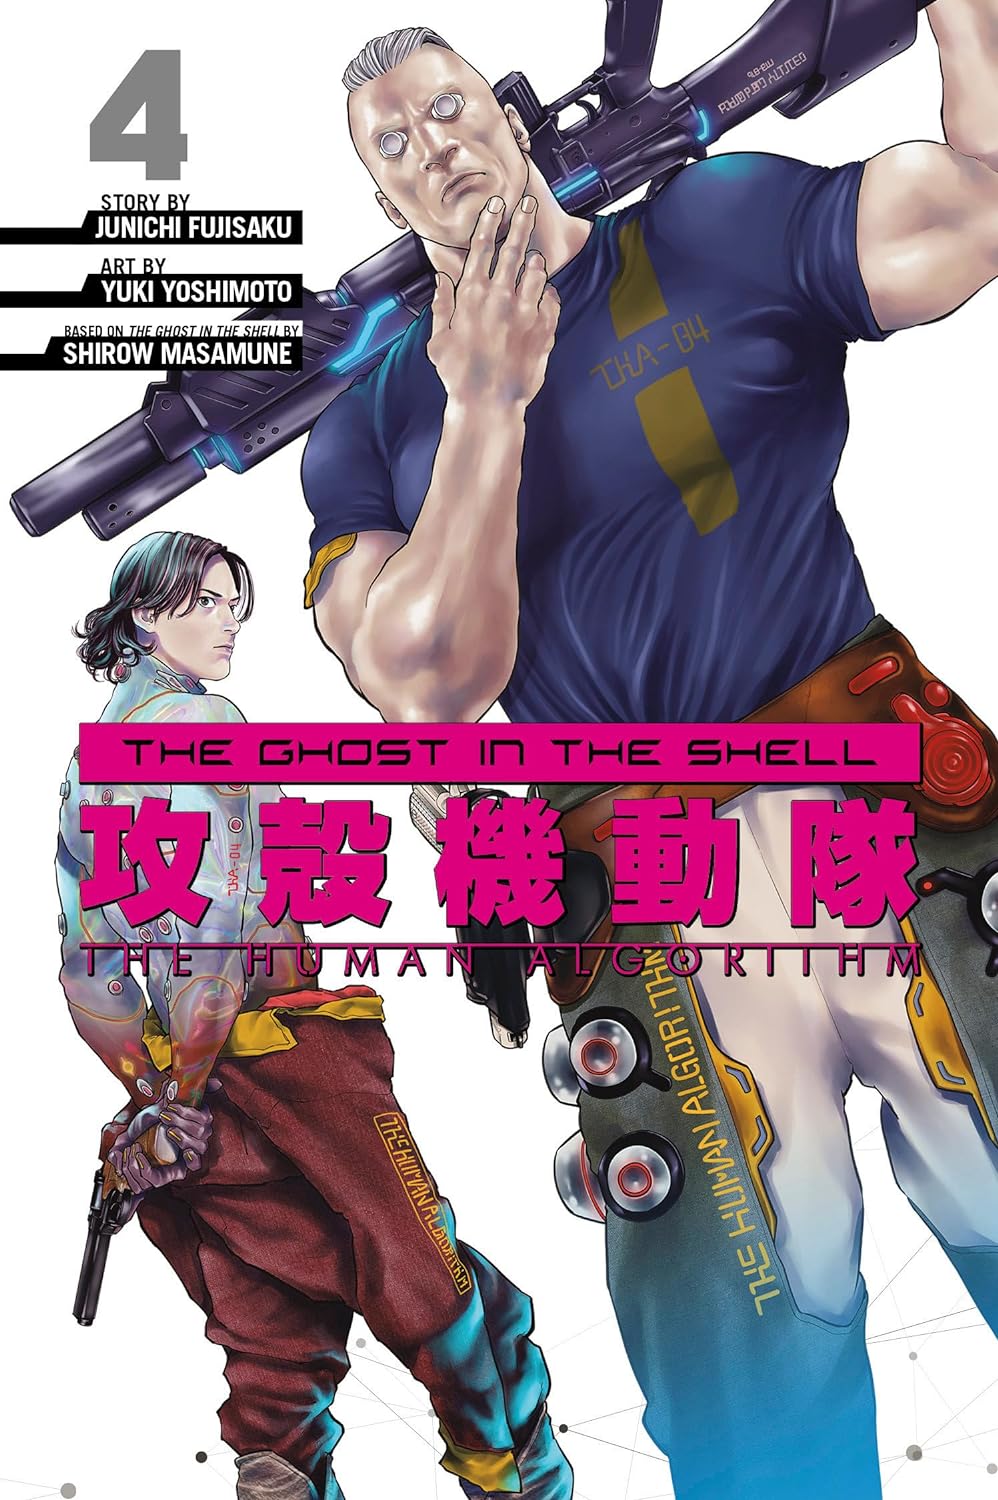 The Ghost in the Shell: The Human Algorithm Vol. 04